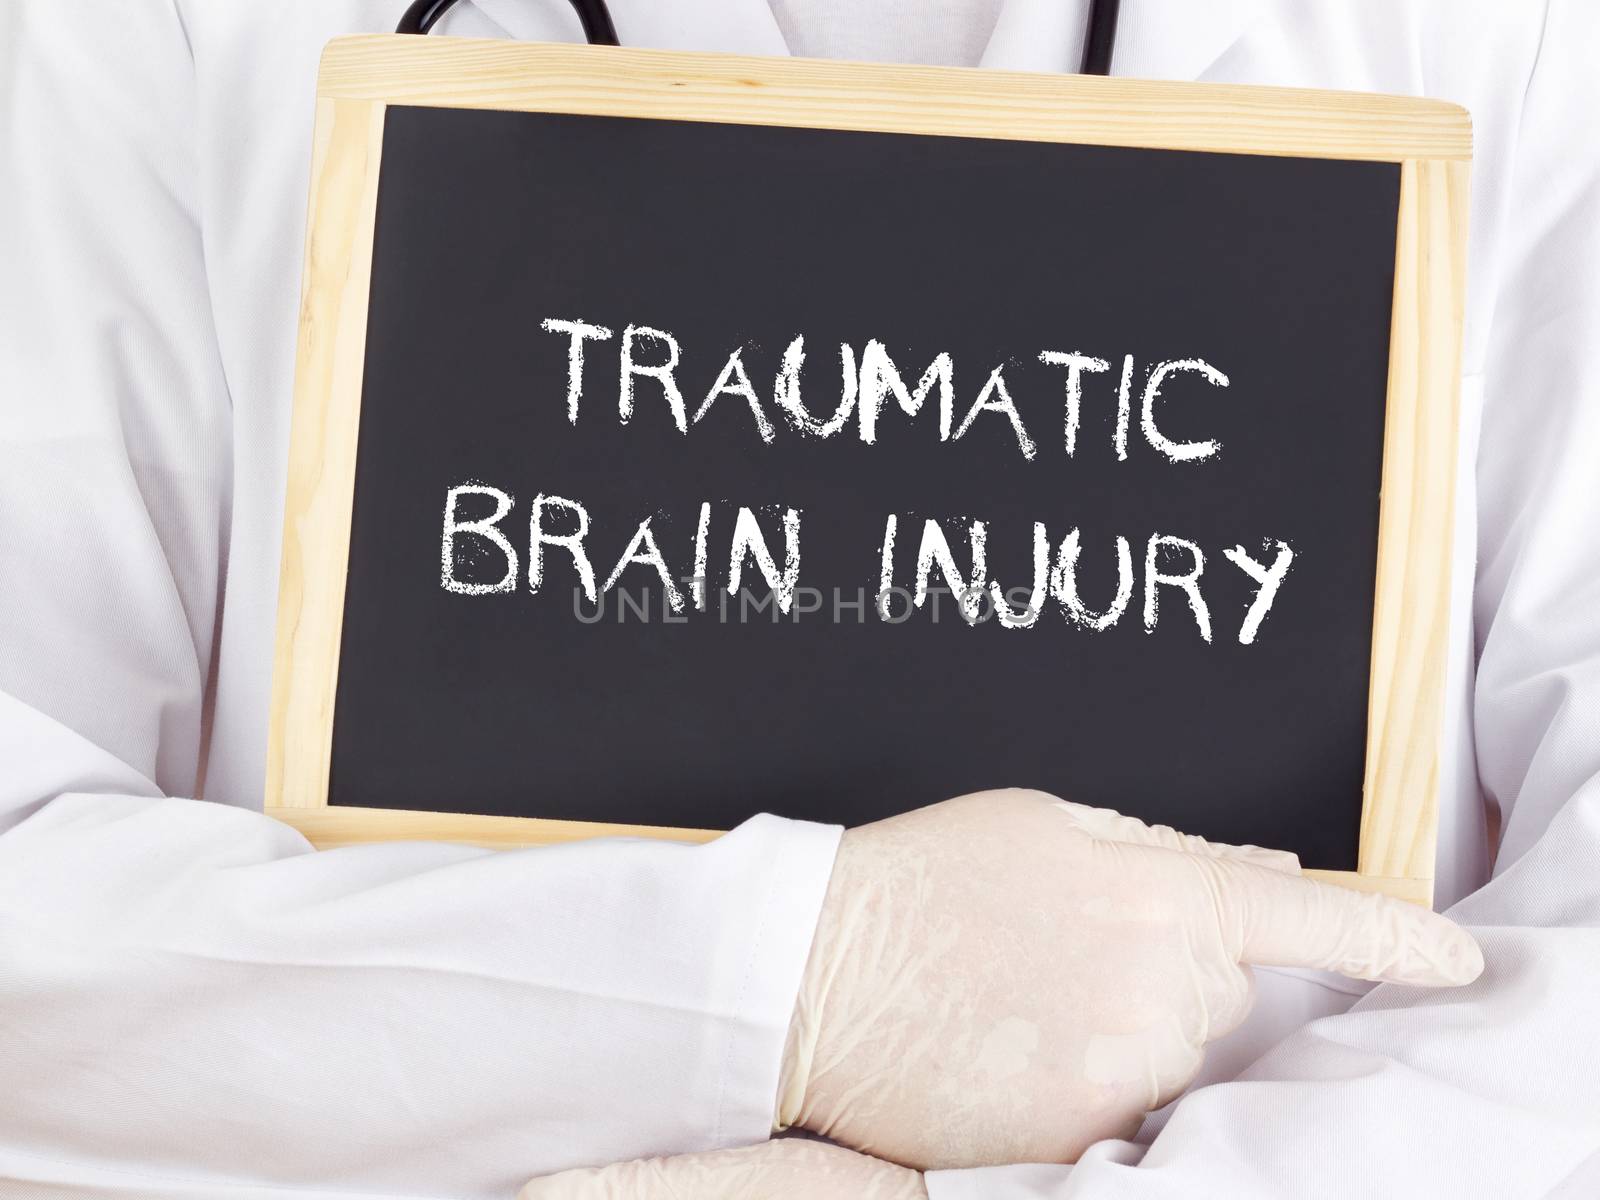 Doctor shows information: traumatic brain injury by gwolters